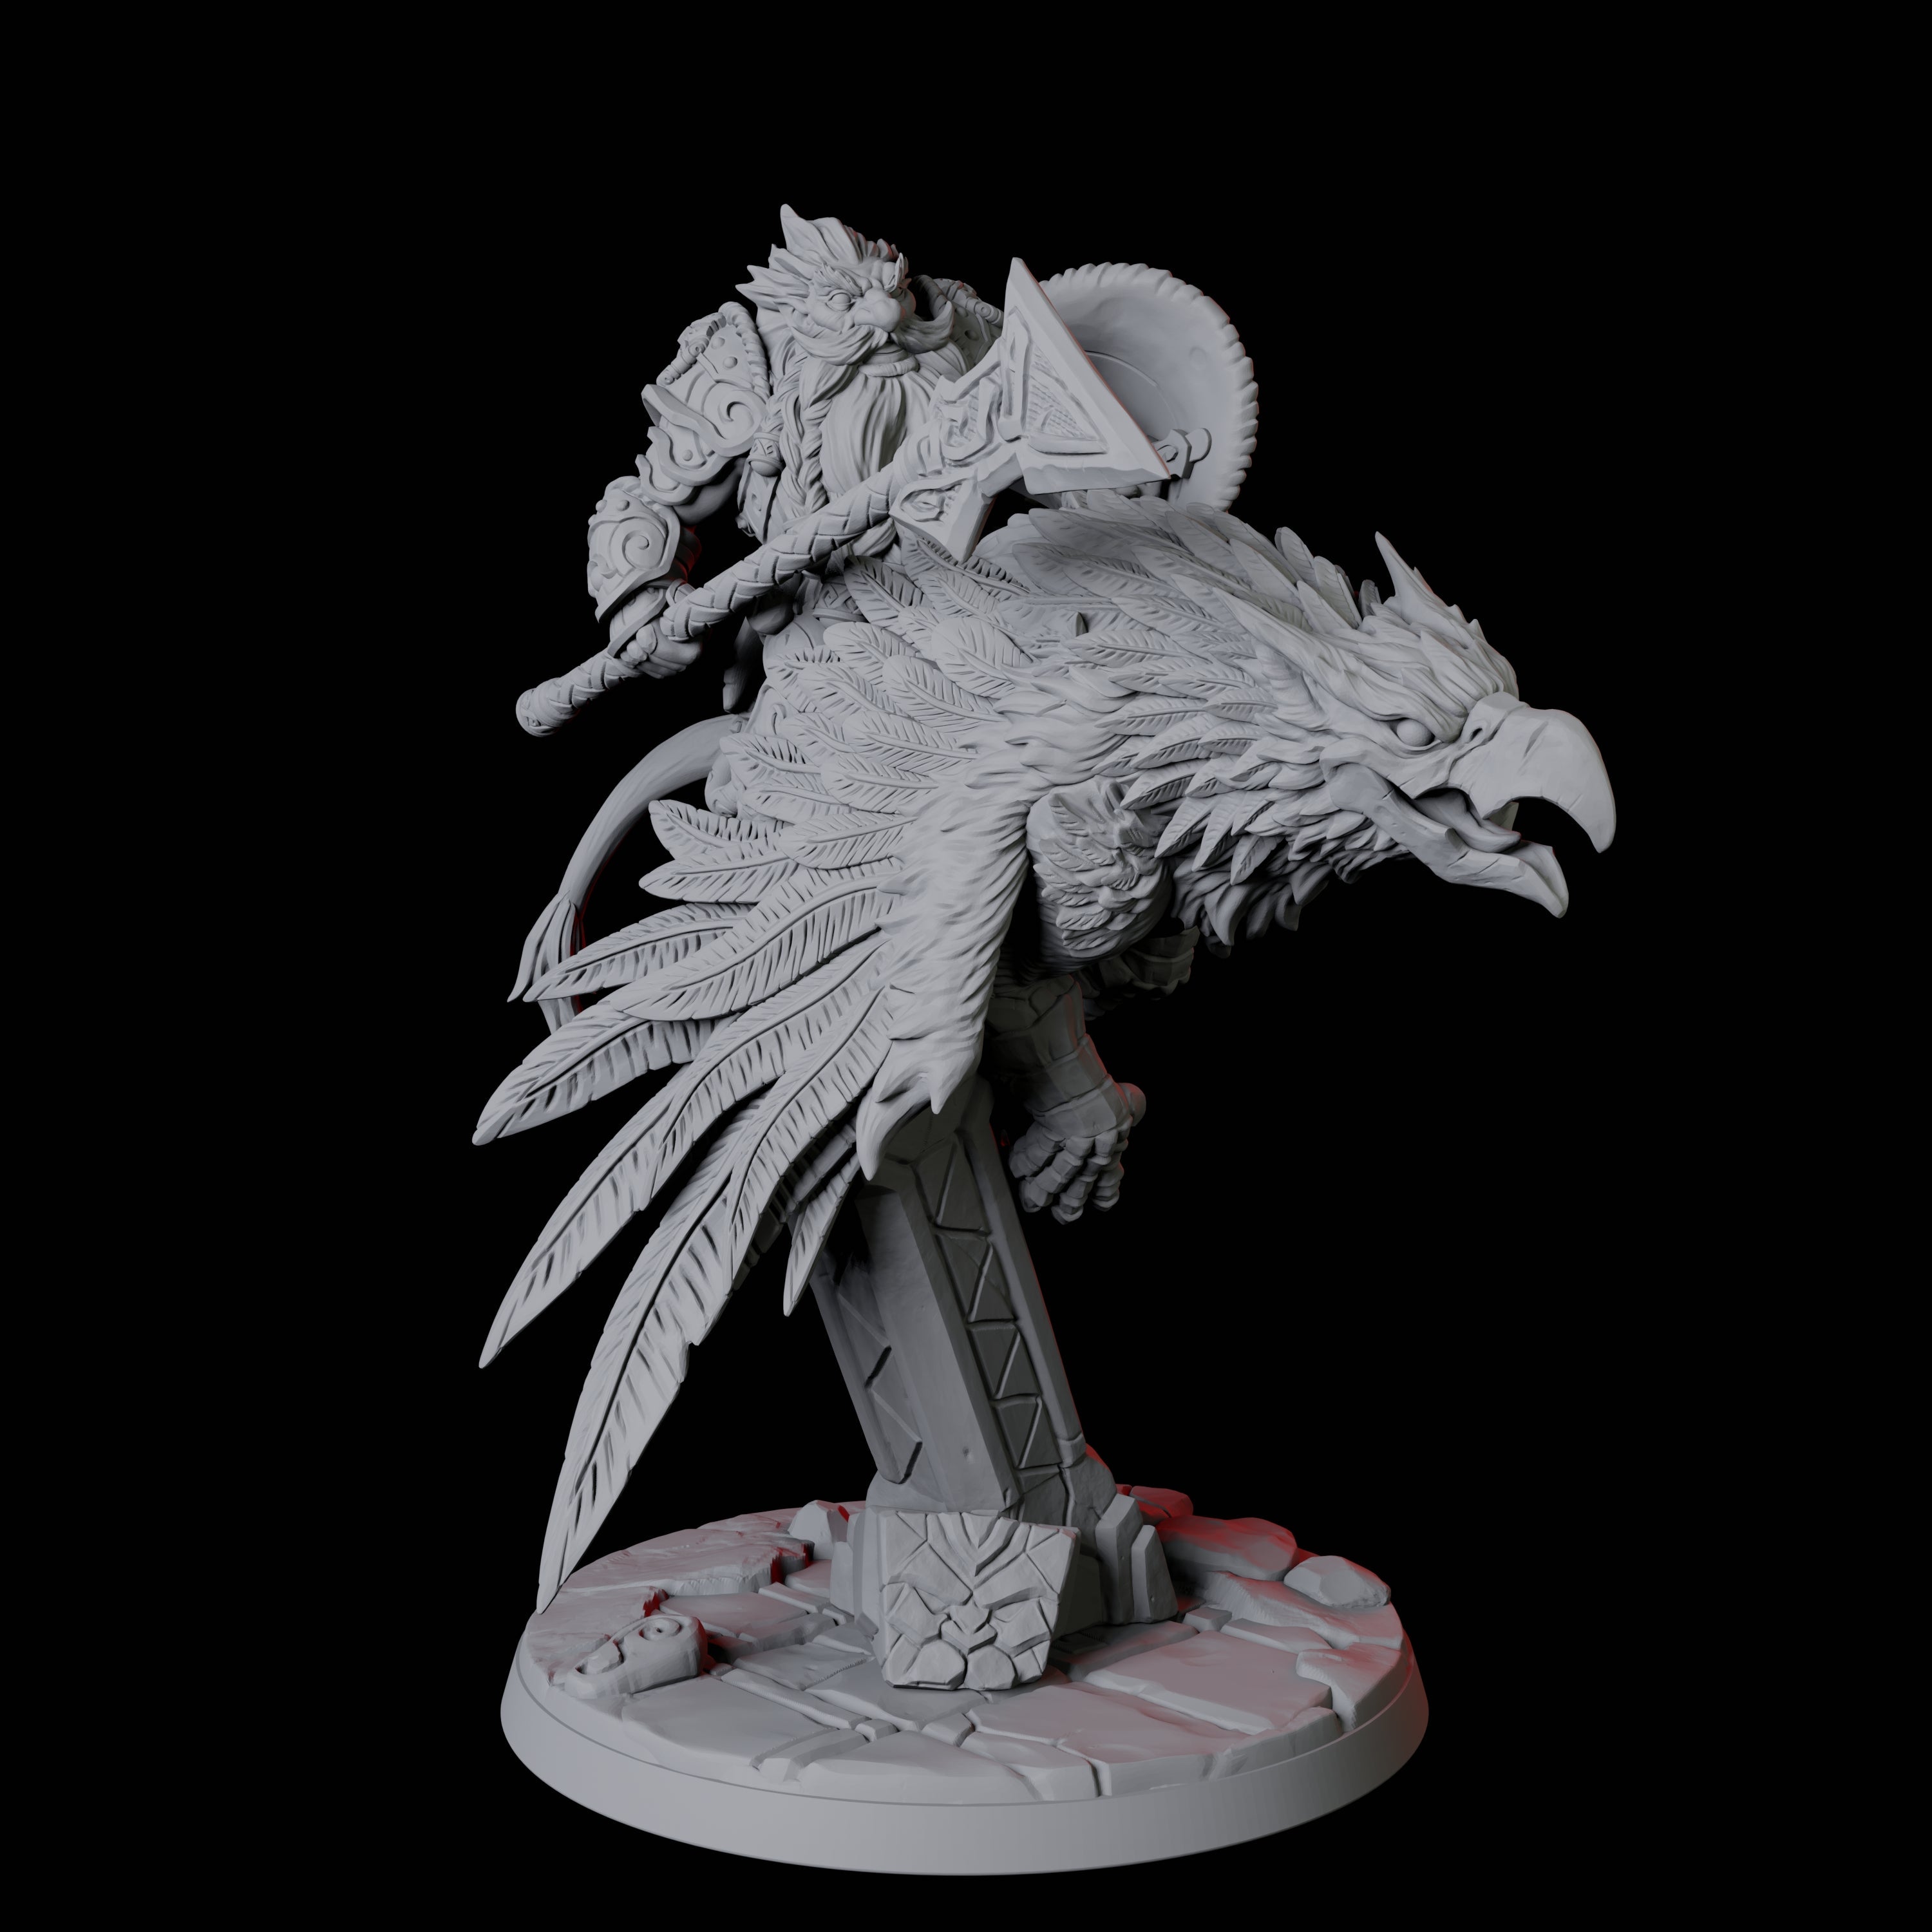 Dwarf Sky Cavalry Miniature for Dungeons and Dragons, Pathfinder or other TTRPGs